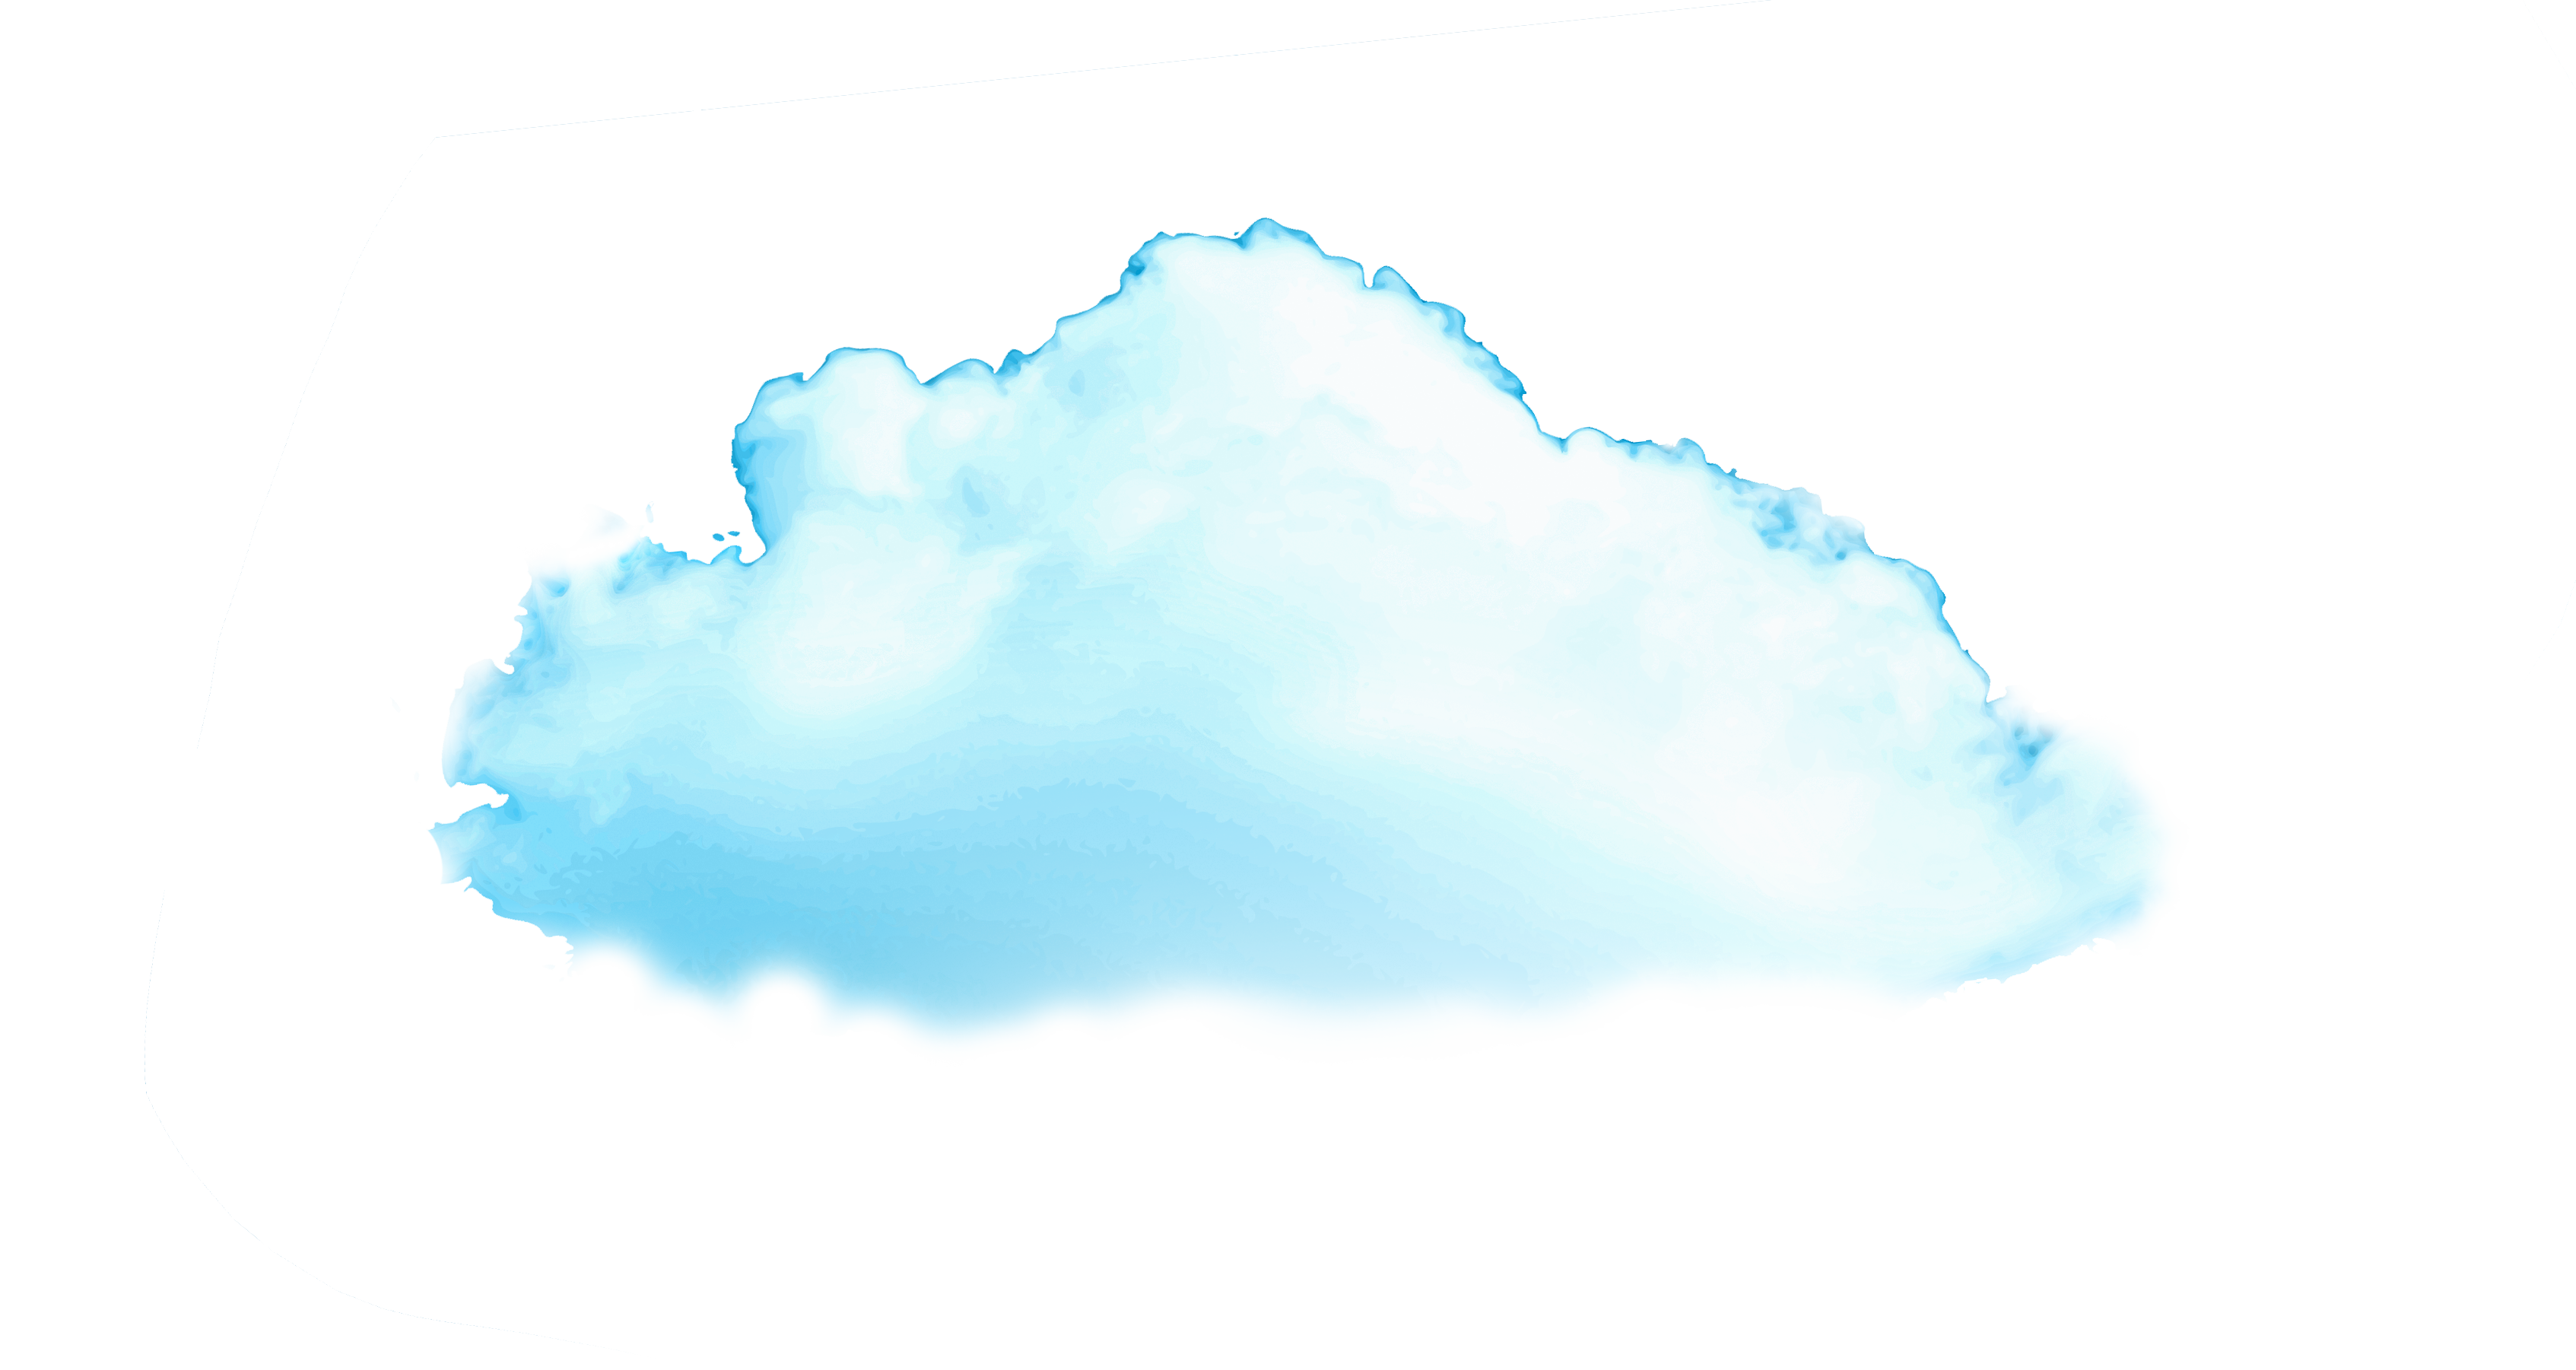 A hot air balloon floating over a cloud